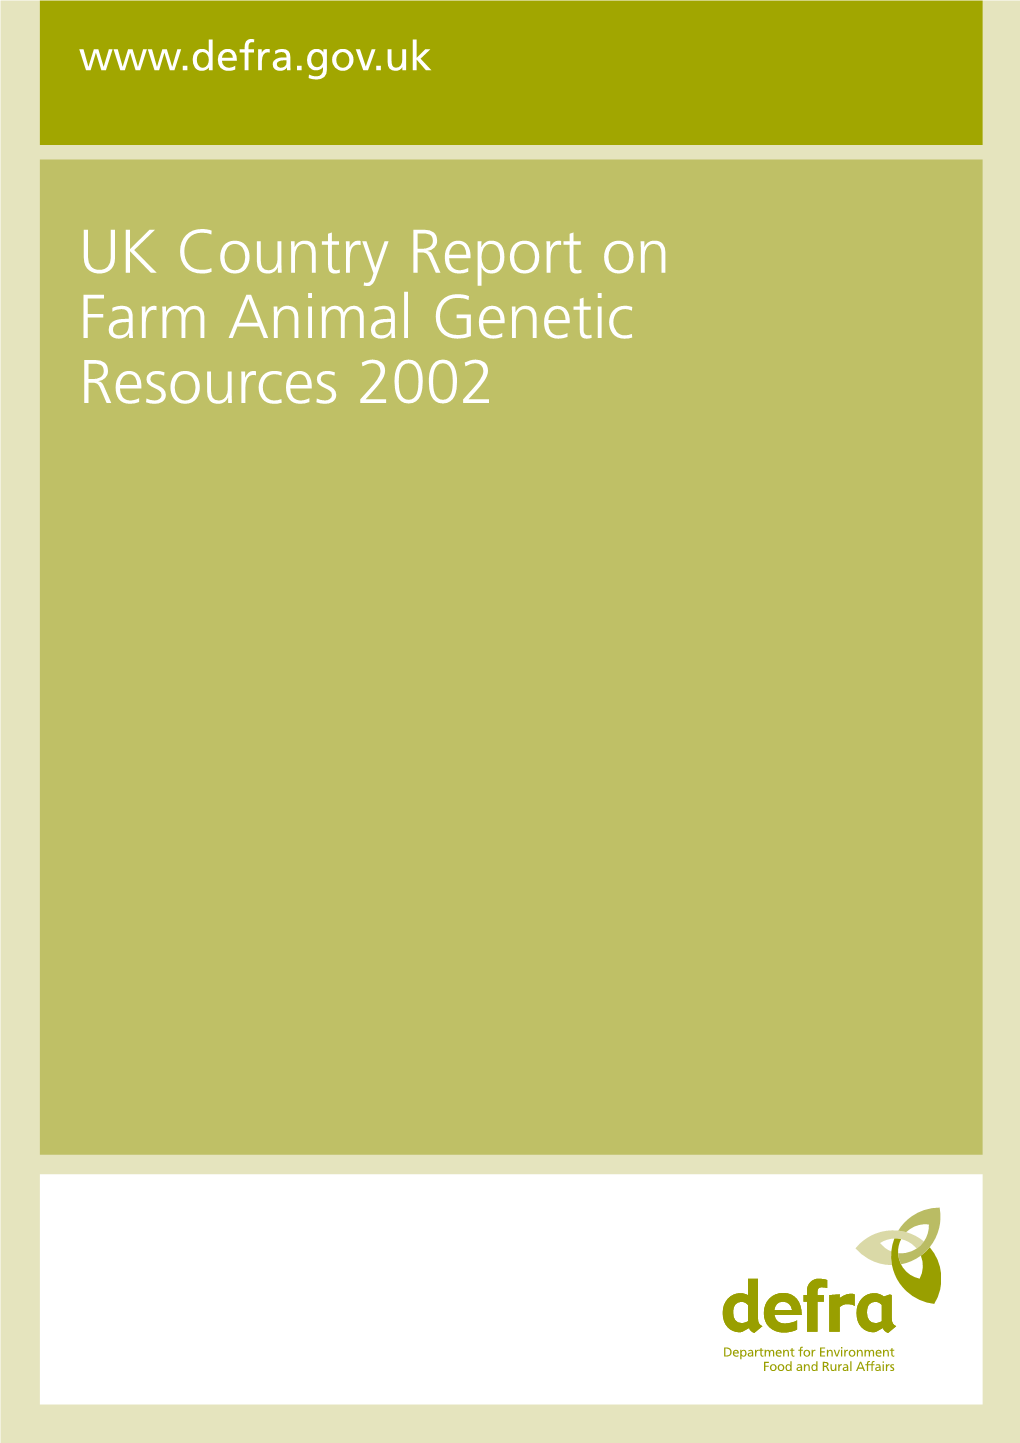 UK Country Report on Farm Animal Genetic Resources 2002